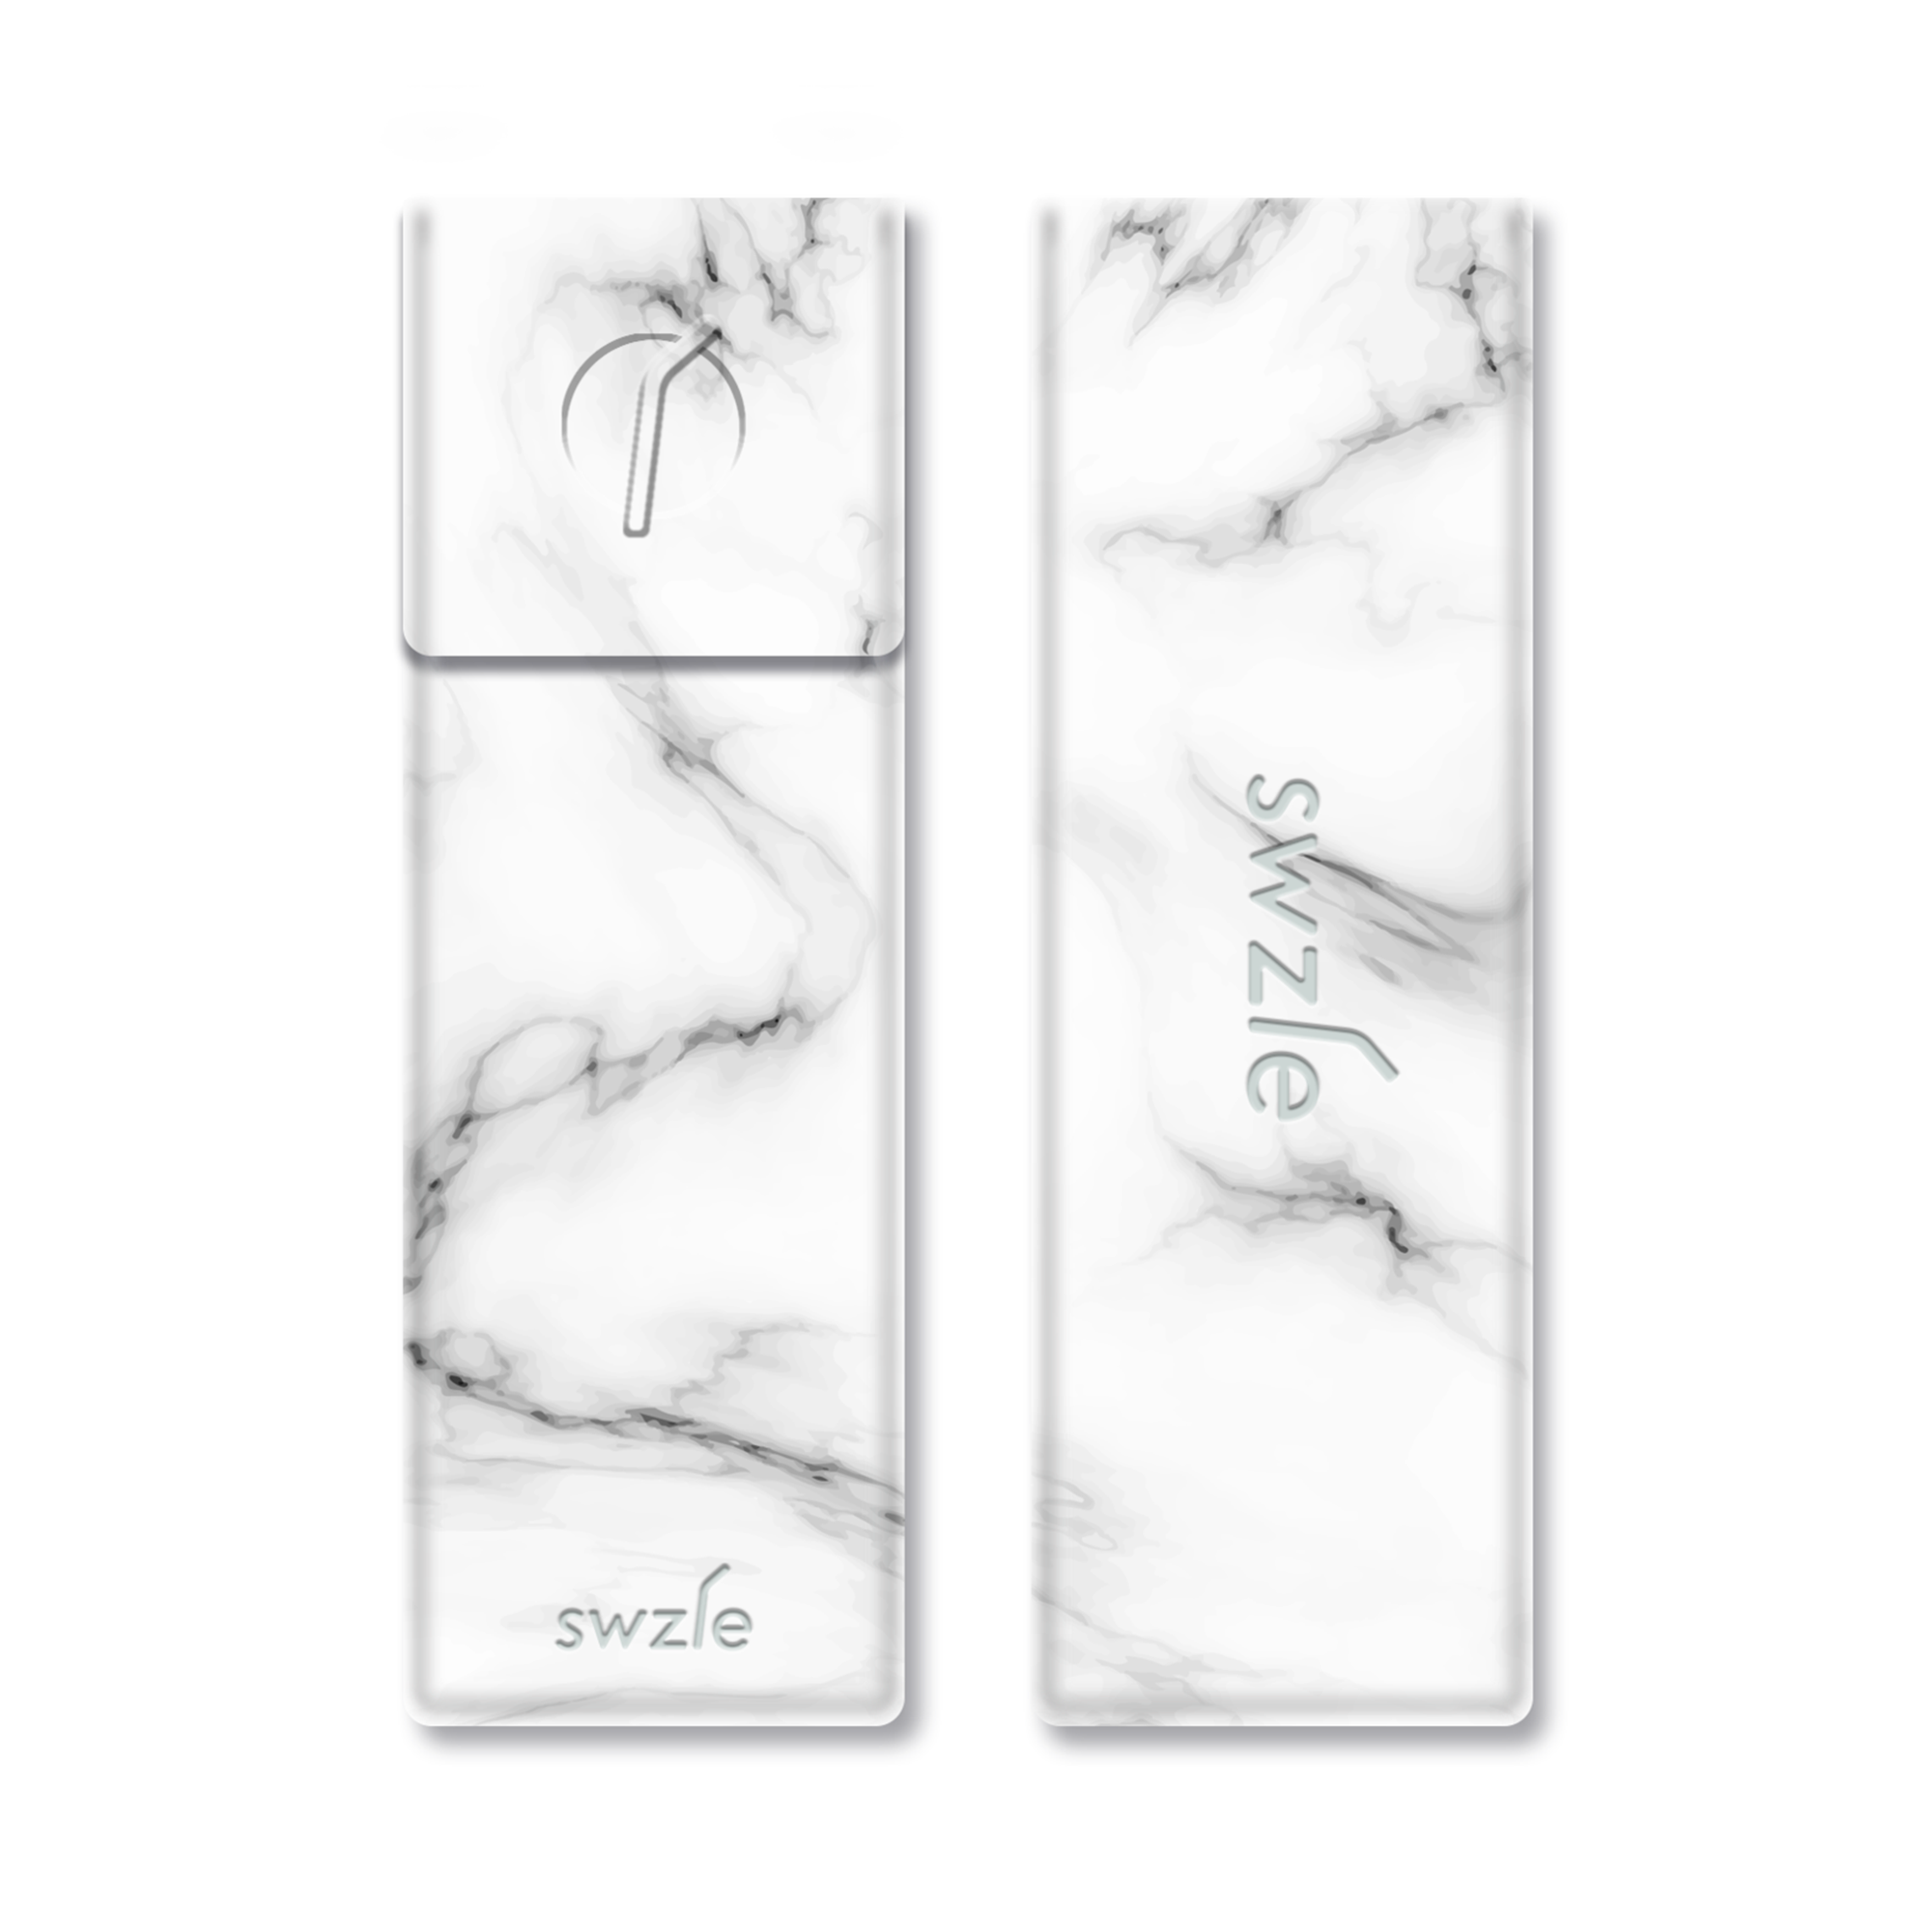 SWZLE Drinking Straw Carrying Case - Marble